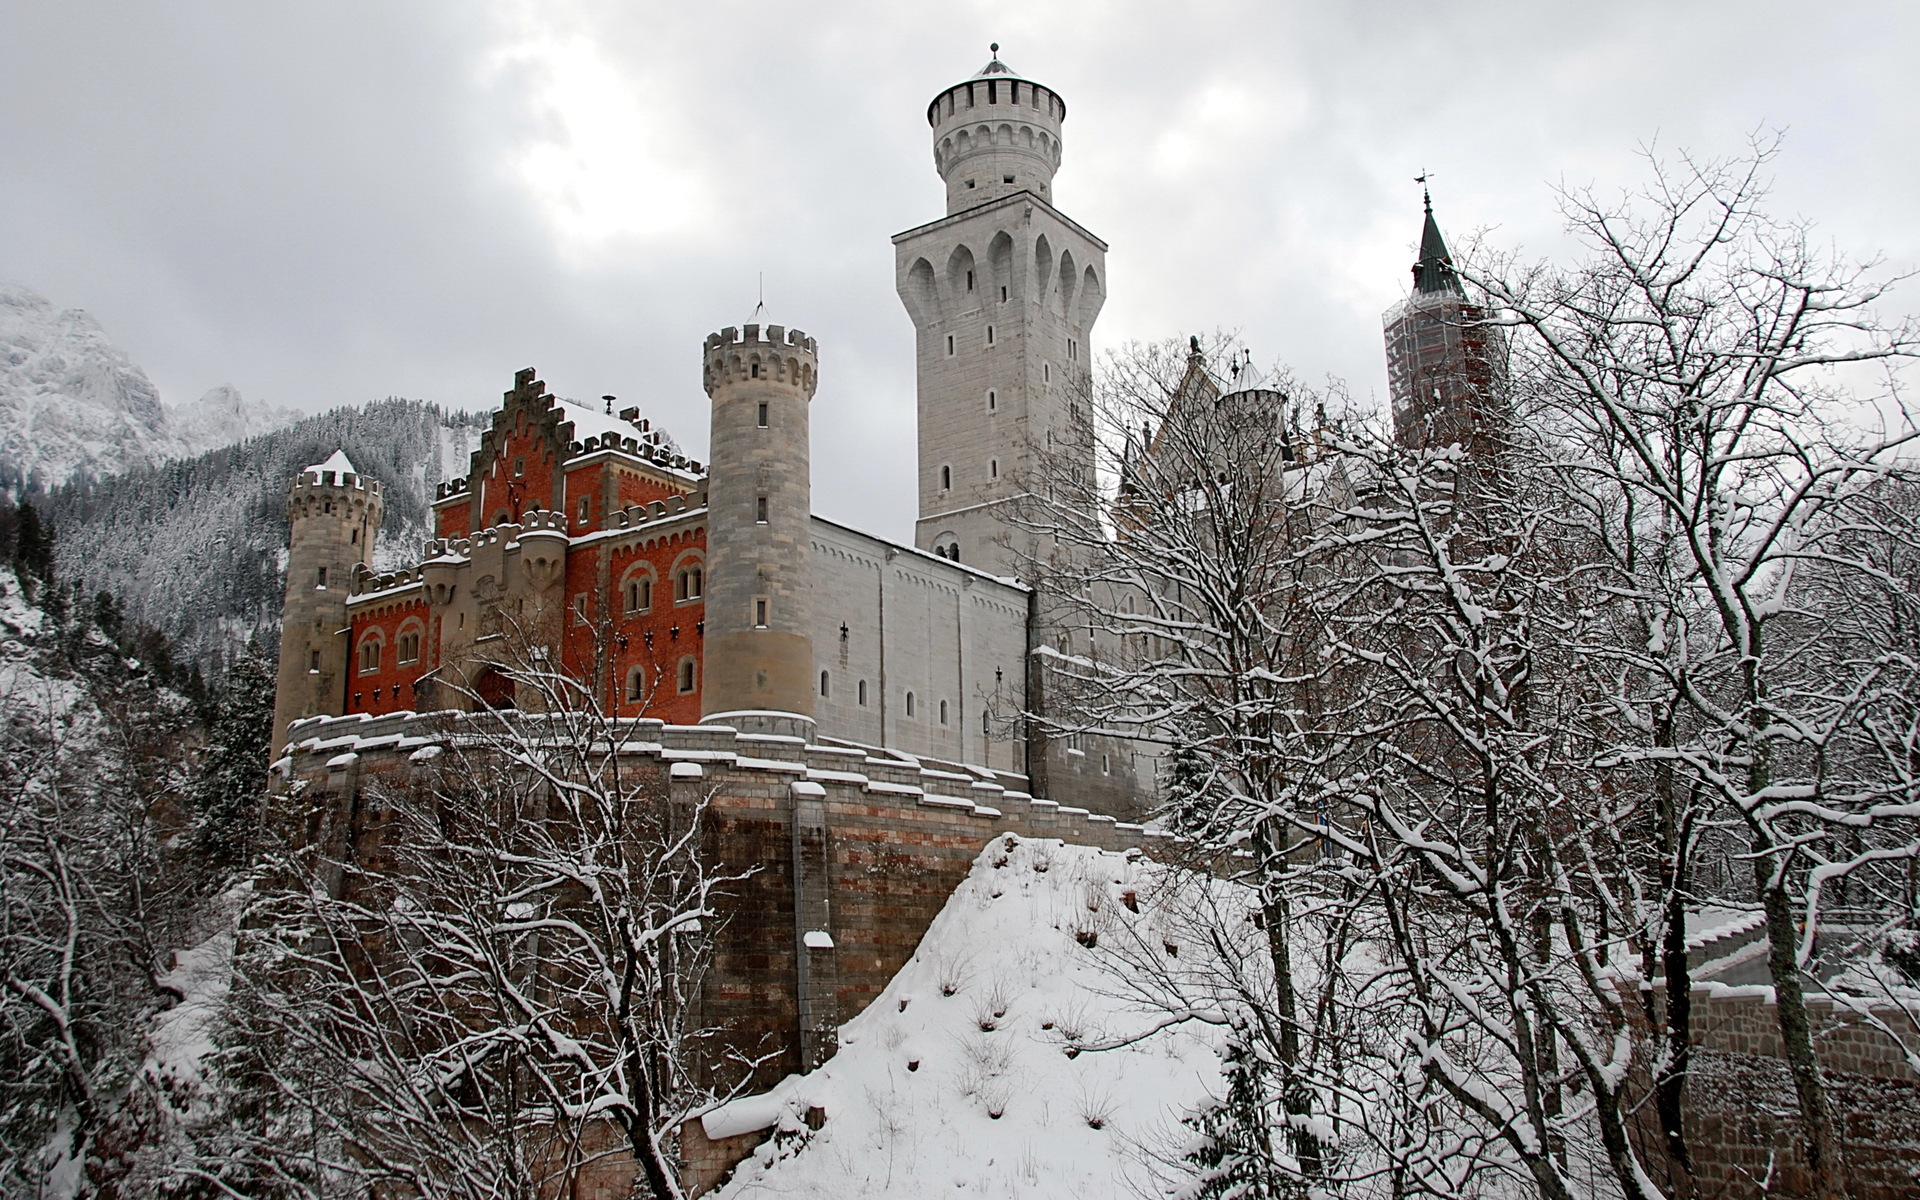 germany, winter, man made, castle, forest, lock, mountain, snow, tree, castles